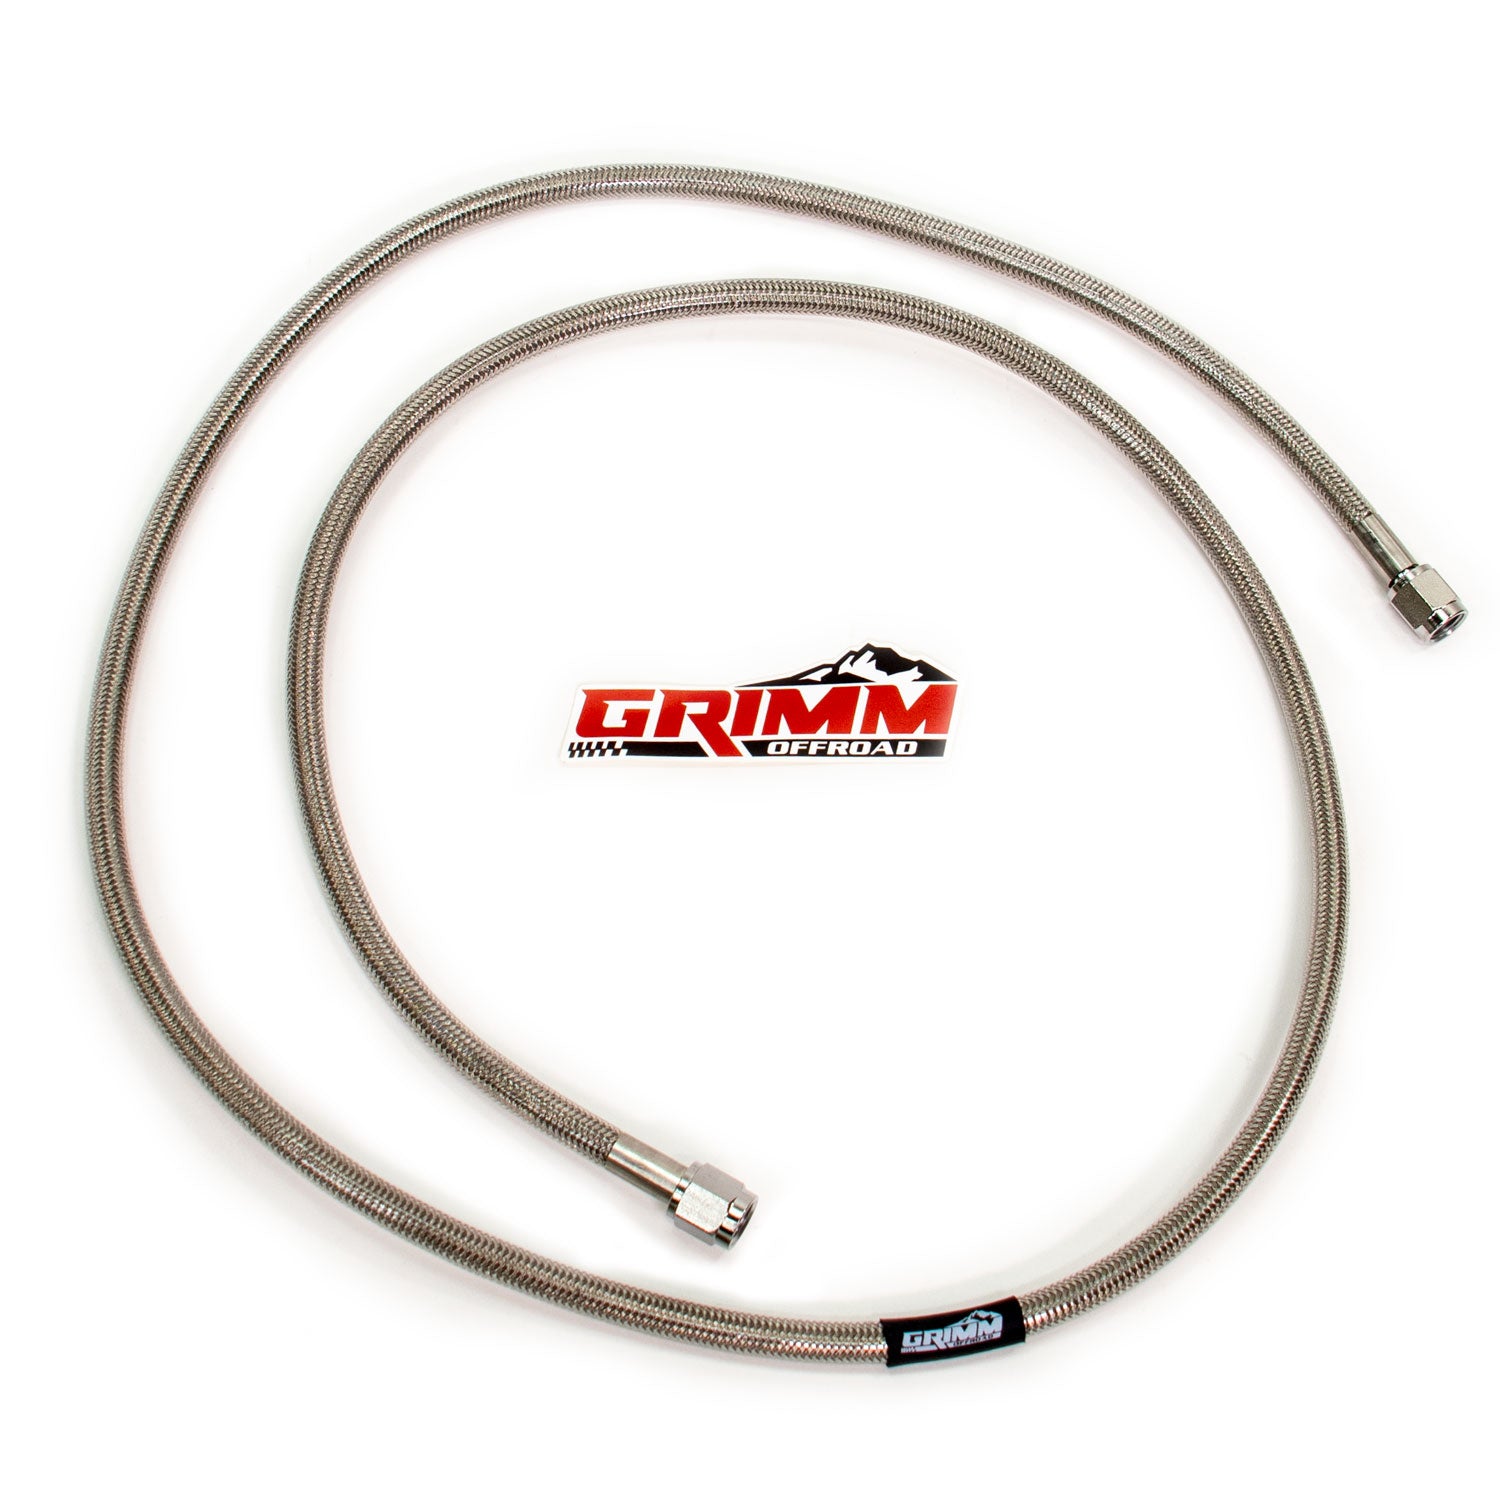 Grimm OffRoad Stainless Steel Braided Air Hose